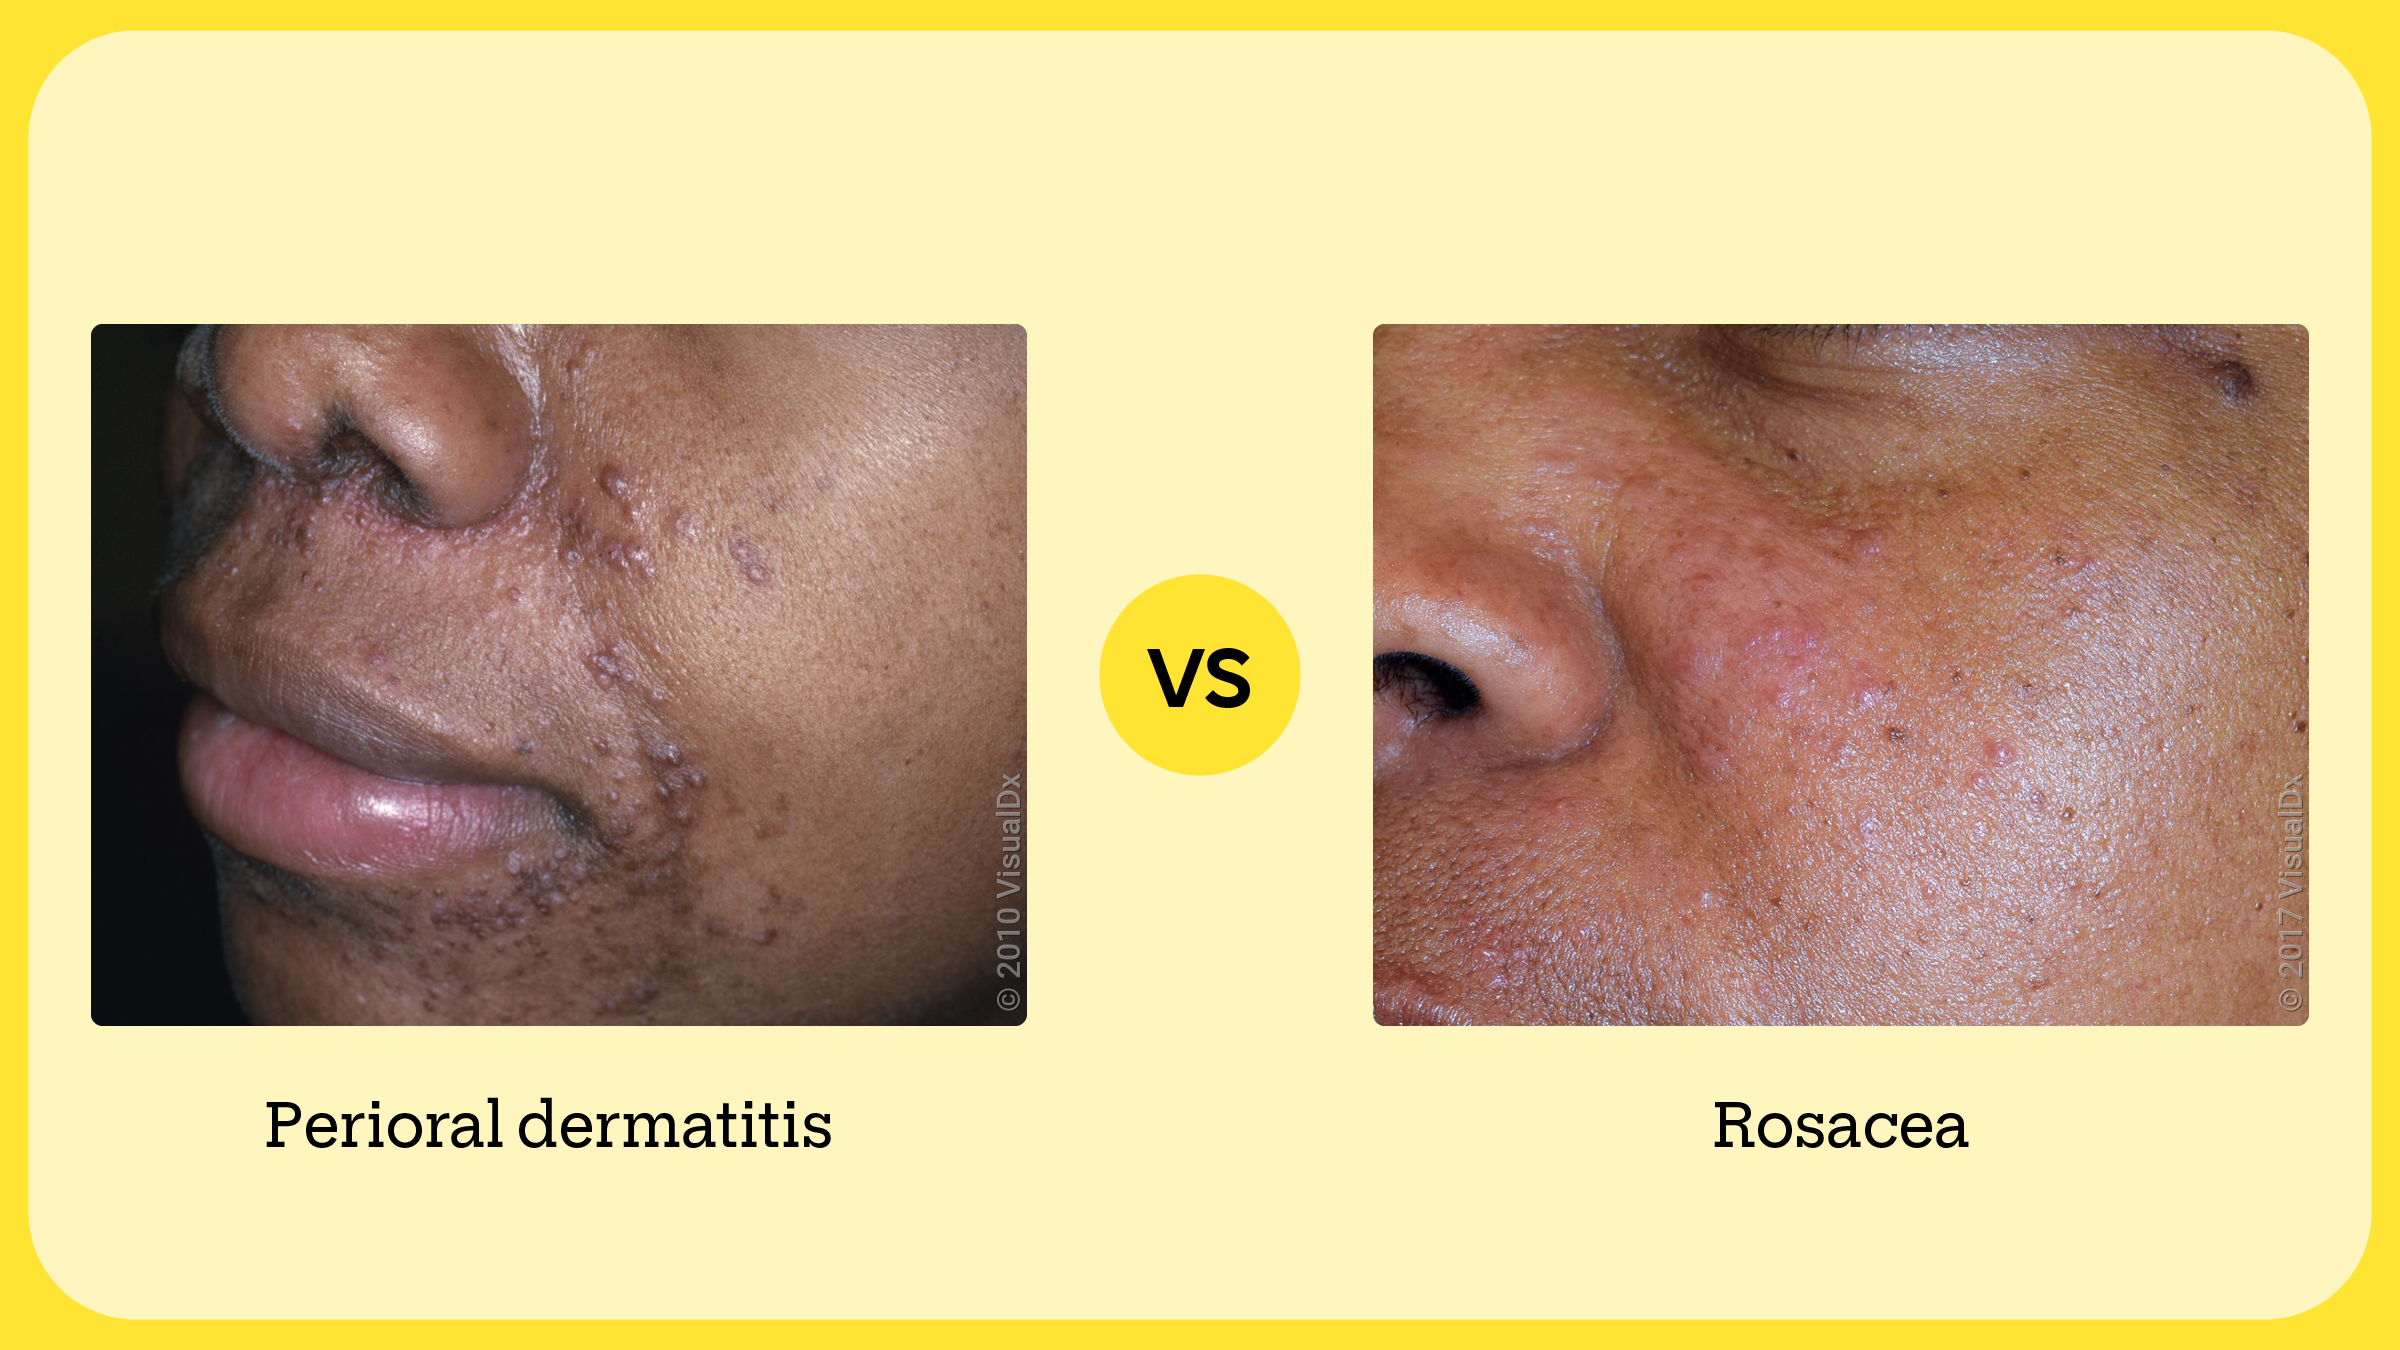 Left: Brown and violet bumps around the mouth and nose in perioral dermatitis. Right: Pink bumps on the cheek in rosacea.